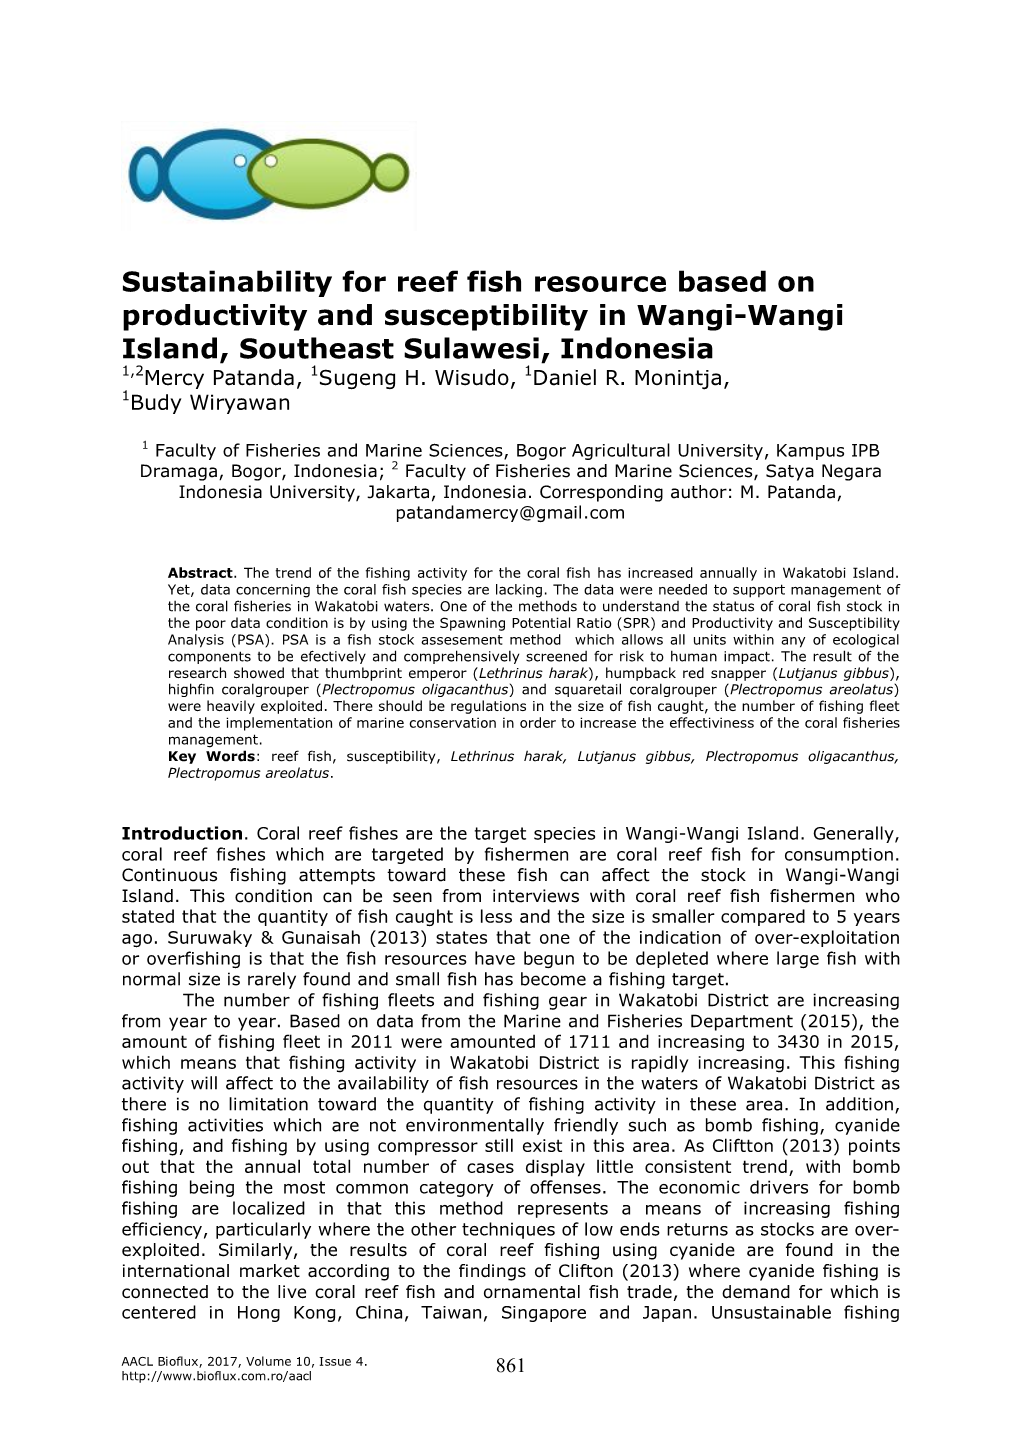 (2017). Sustainability for Reef Fish Resource Based On